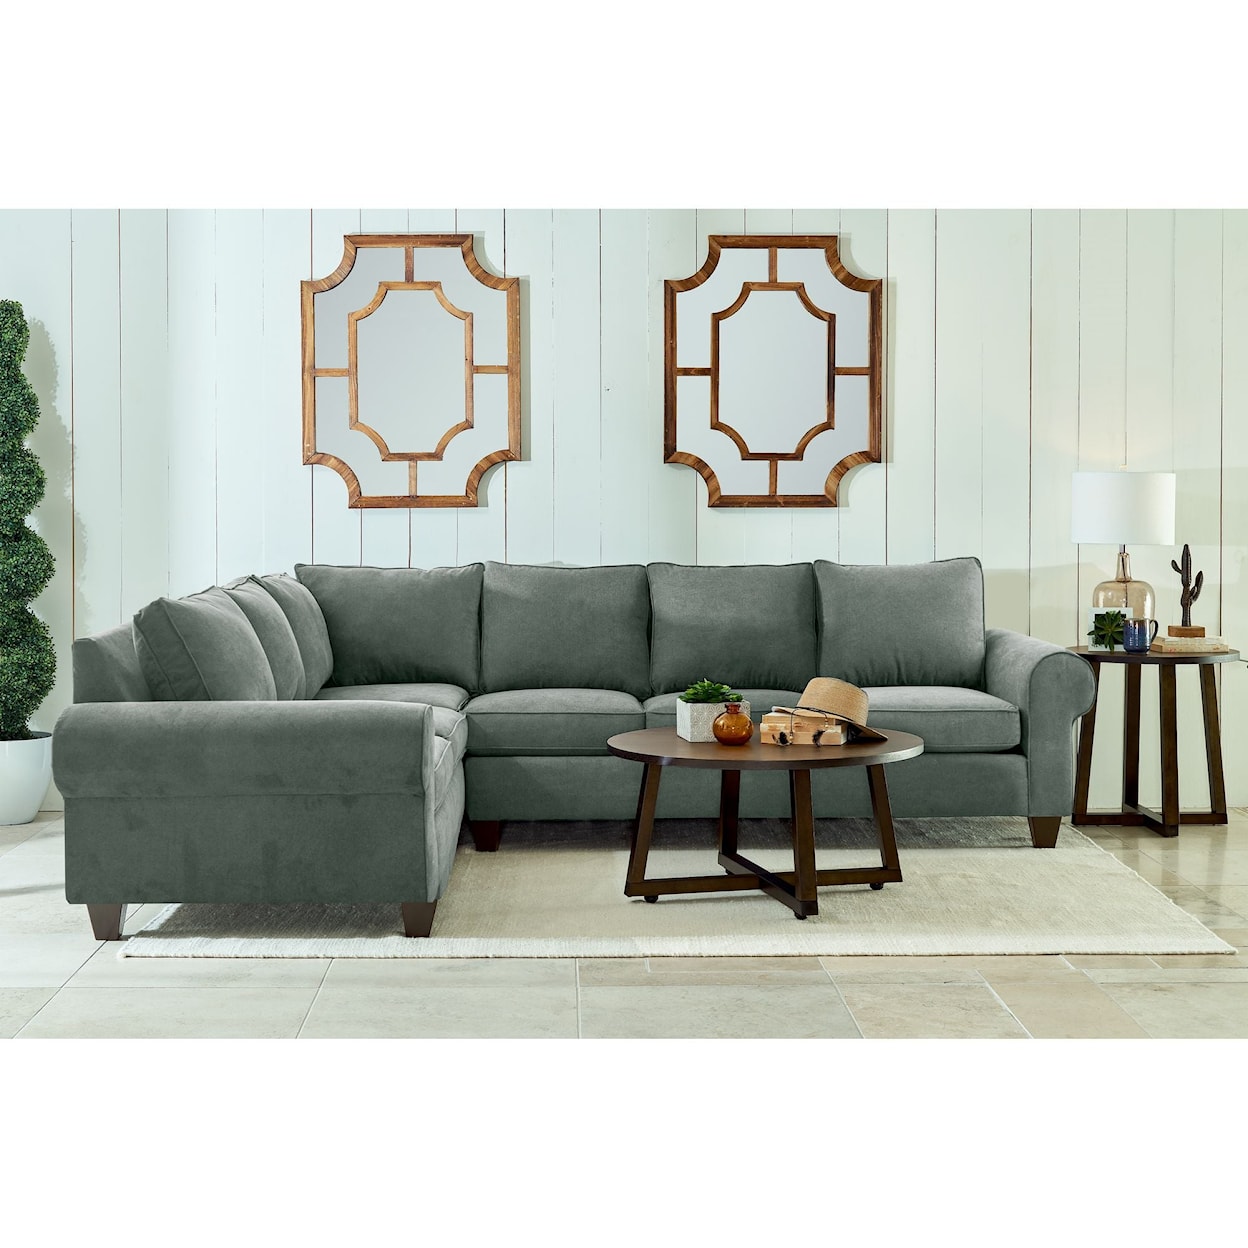 Elements International 705 Sectional Sofa Set with Reversiable Cushions